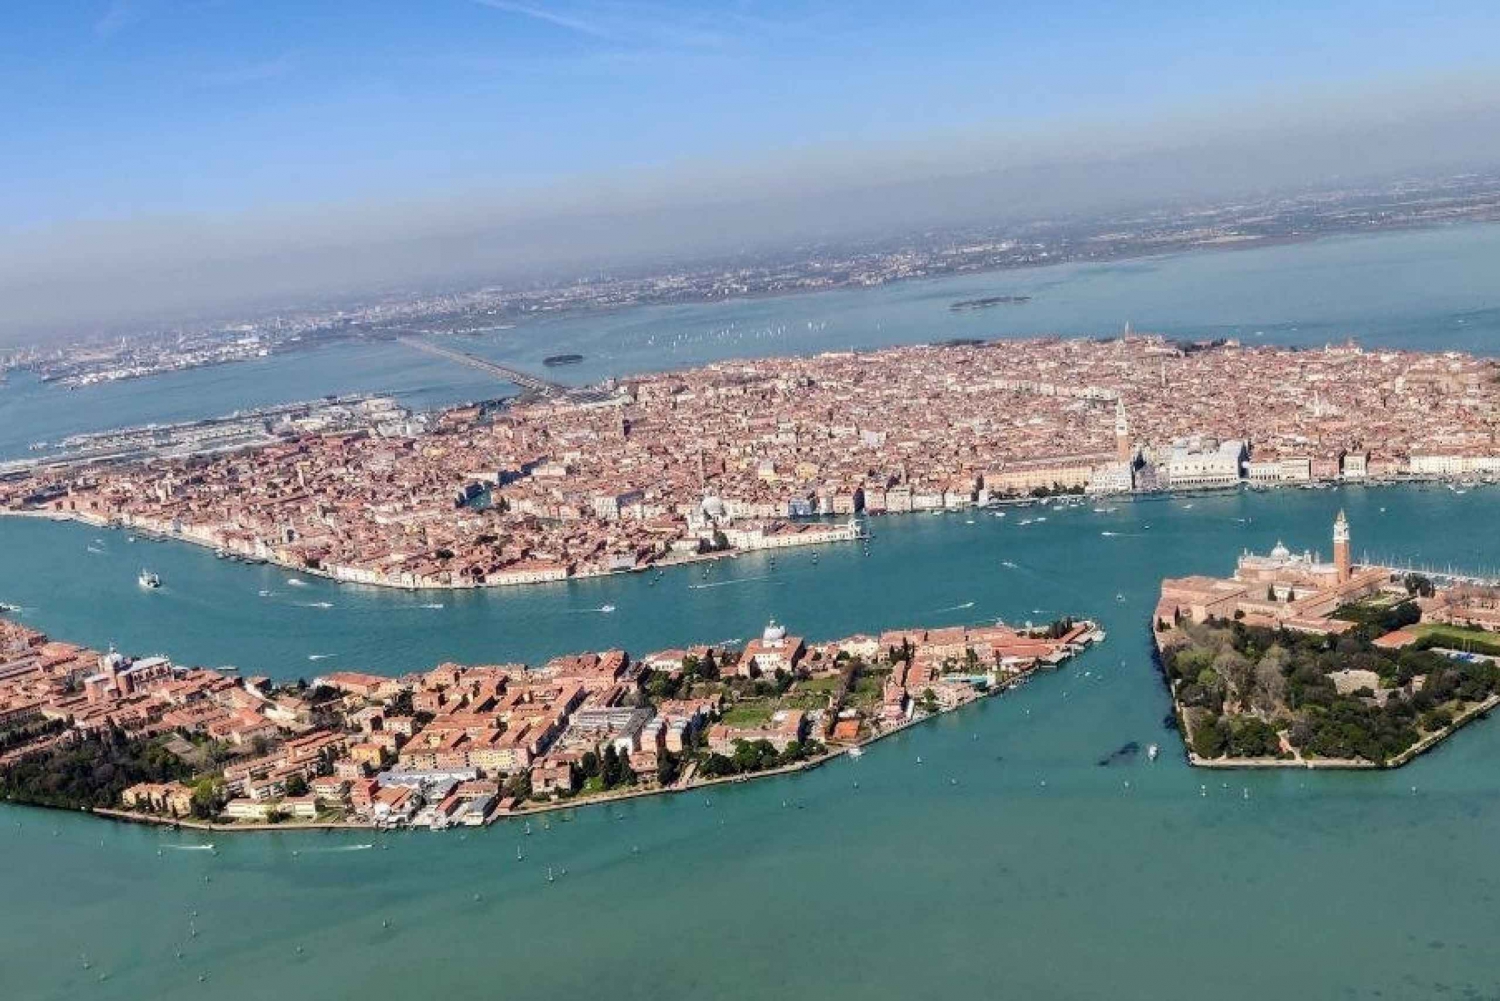 Venice: Private Helicopter Tour over the Lagoon